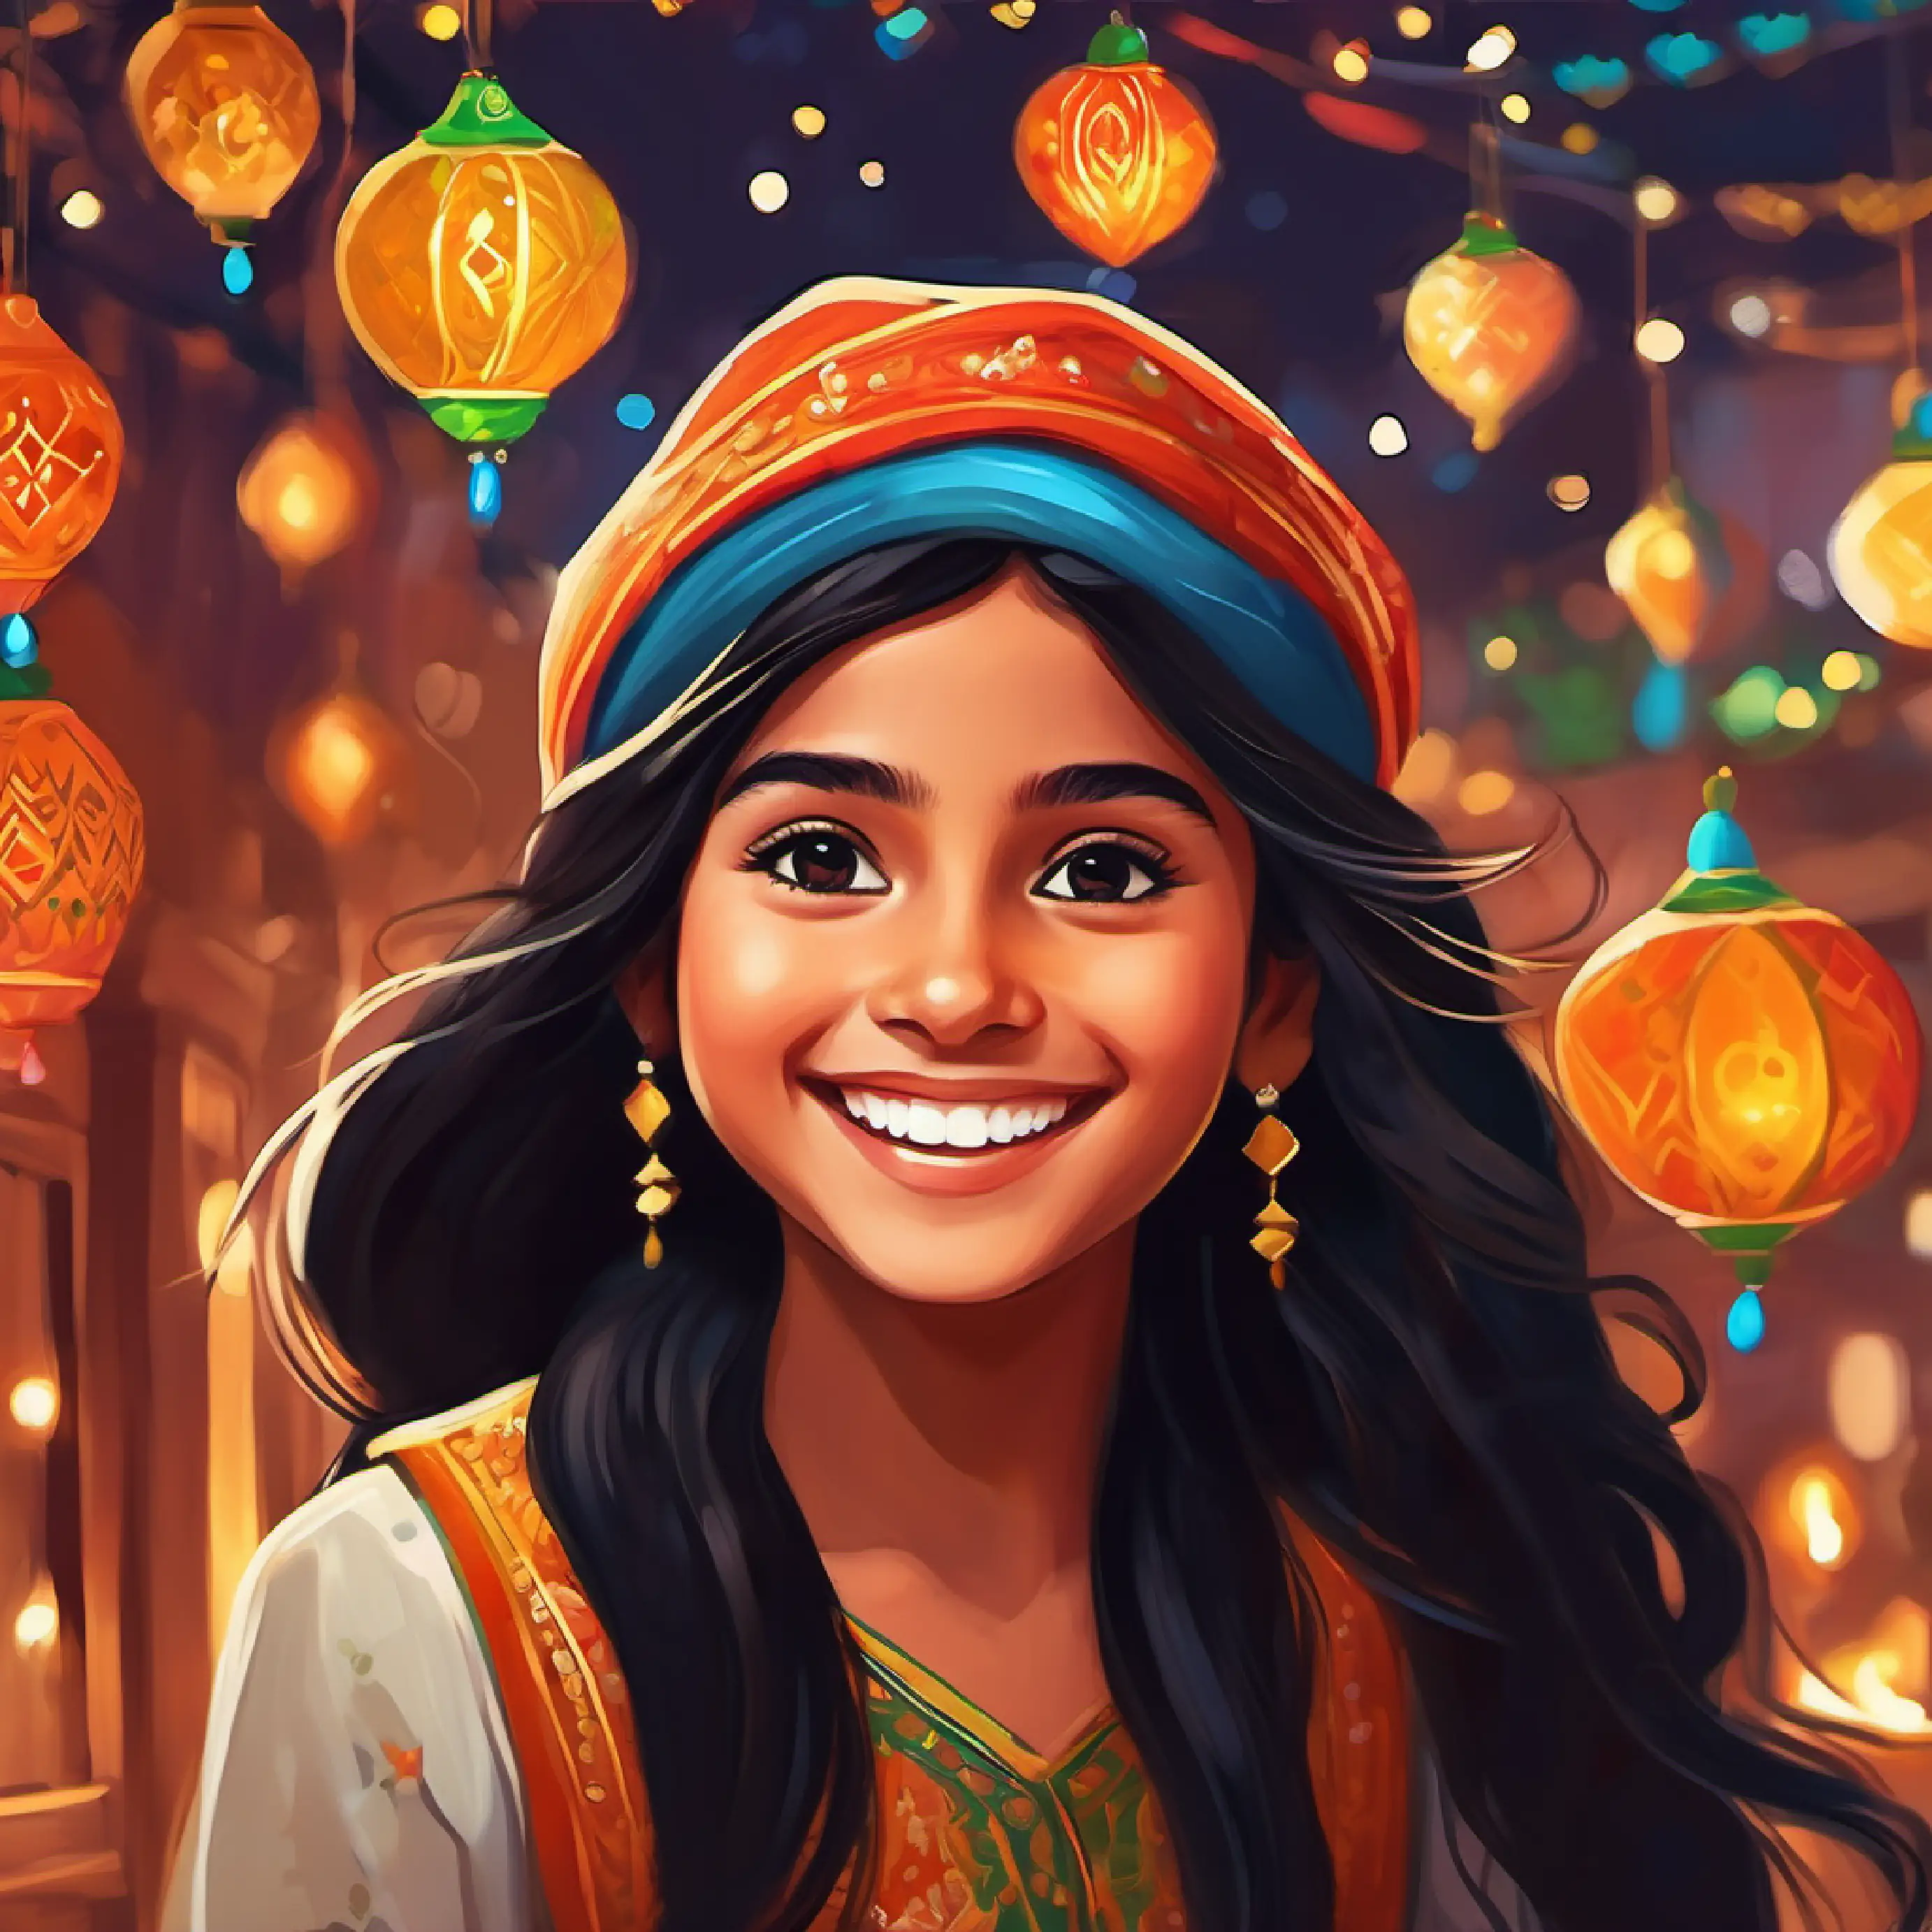 Young girl, long black hair, brown eyes, vibrant smile in Jaipur, excited for Diwali preparations.